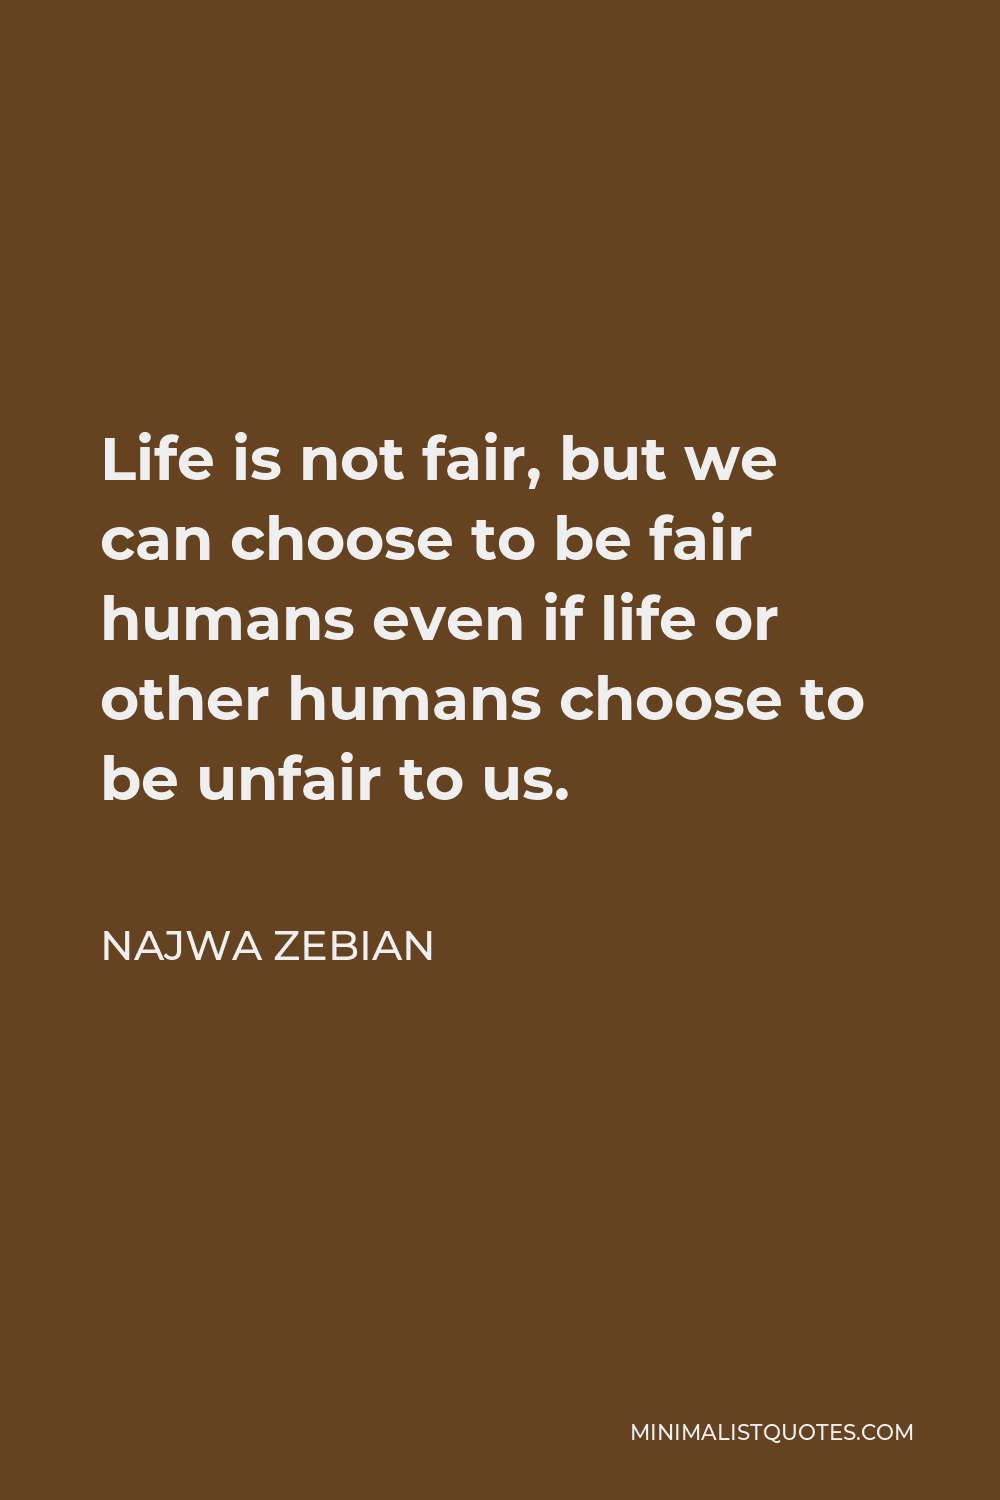 Najwa Zebian Quote - Life is not fair, but we can choose to be fair humans even if life or other humans choose to be unfair to us.